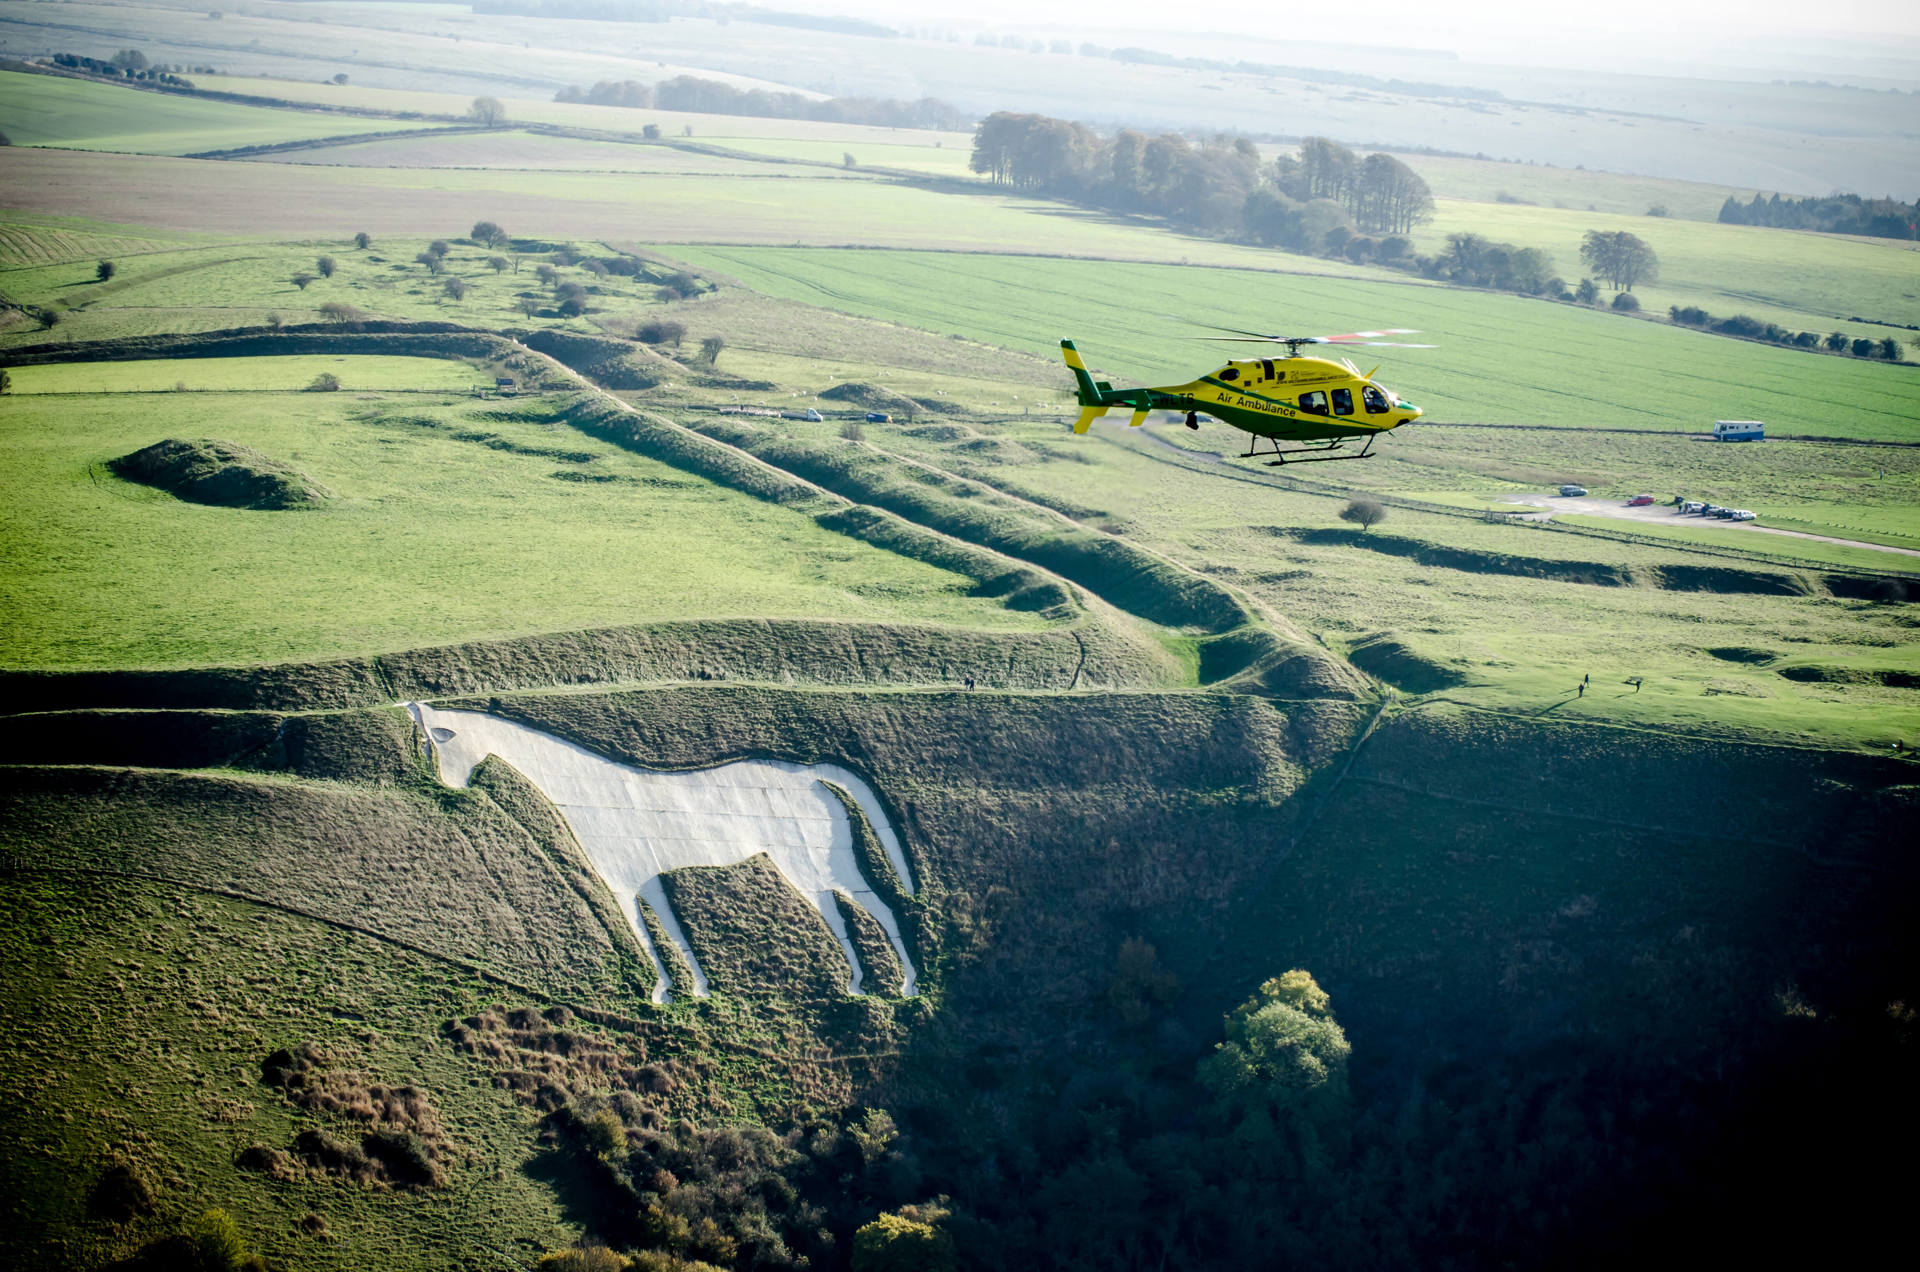 The helicopter in flight over a White Horse in Wiltshire.